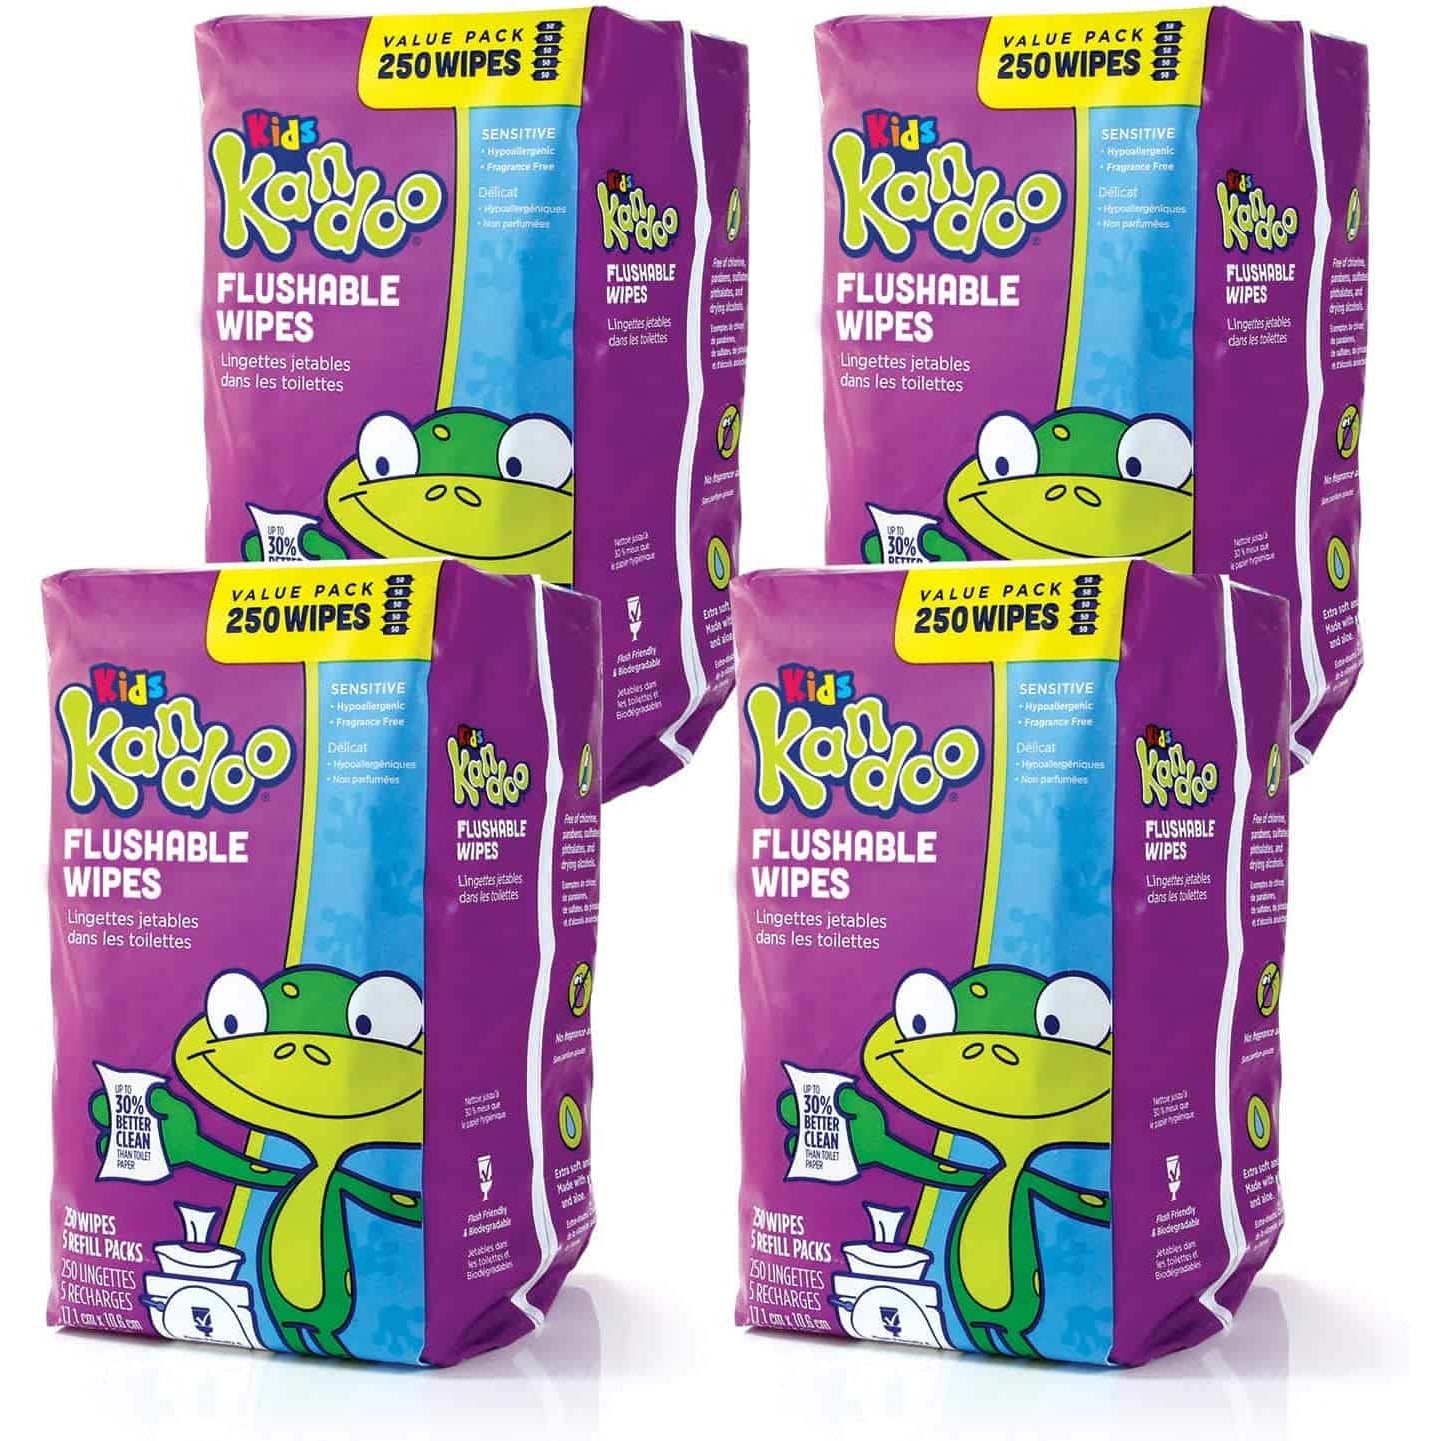 Flushable Wipes for Baby and Kids by Kandoo,  250 Ct, Pk of 4